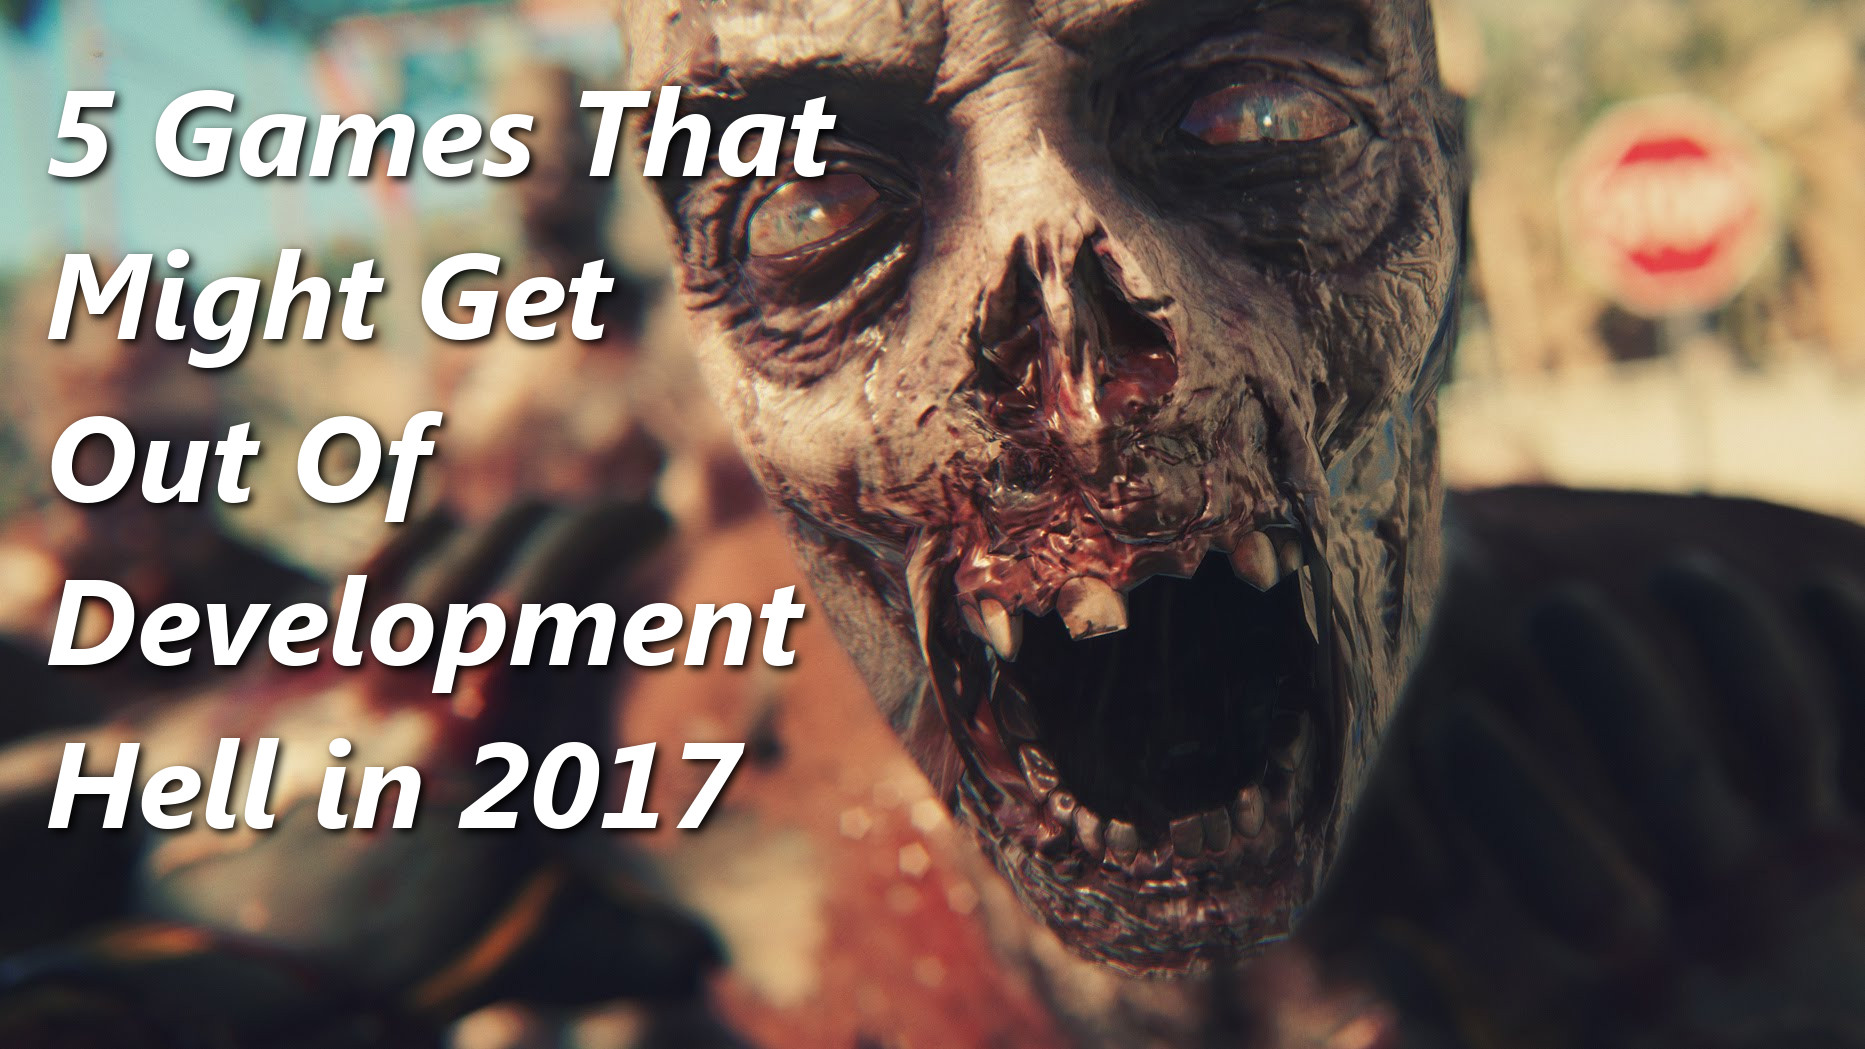 5 Games That Might Get Out Of Development Hell In 2017